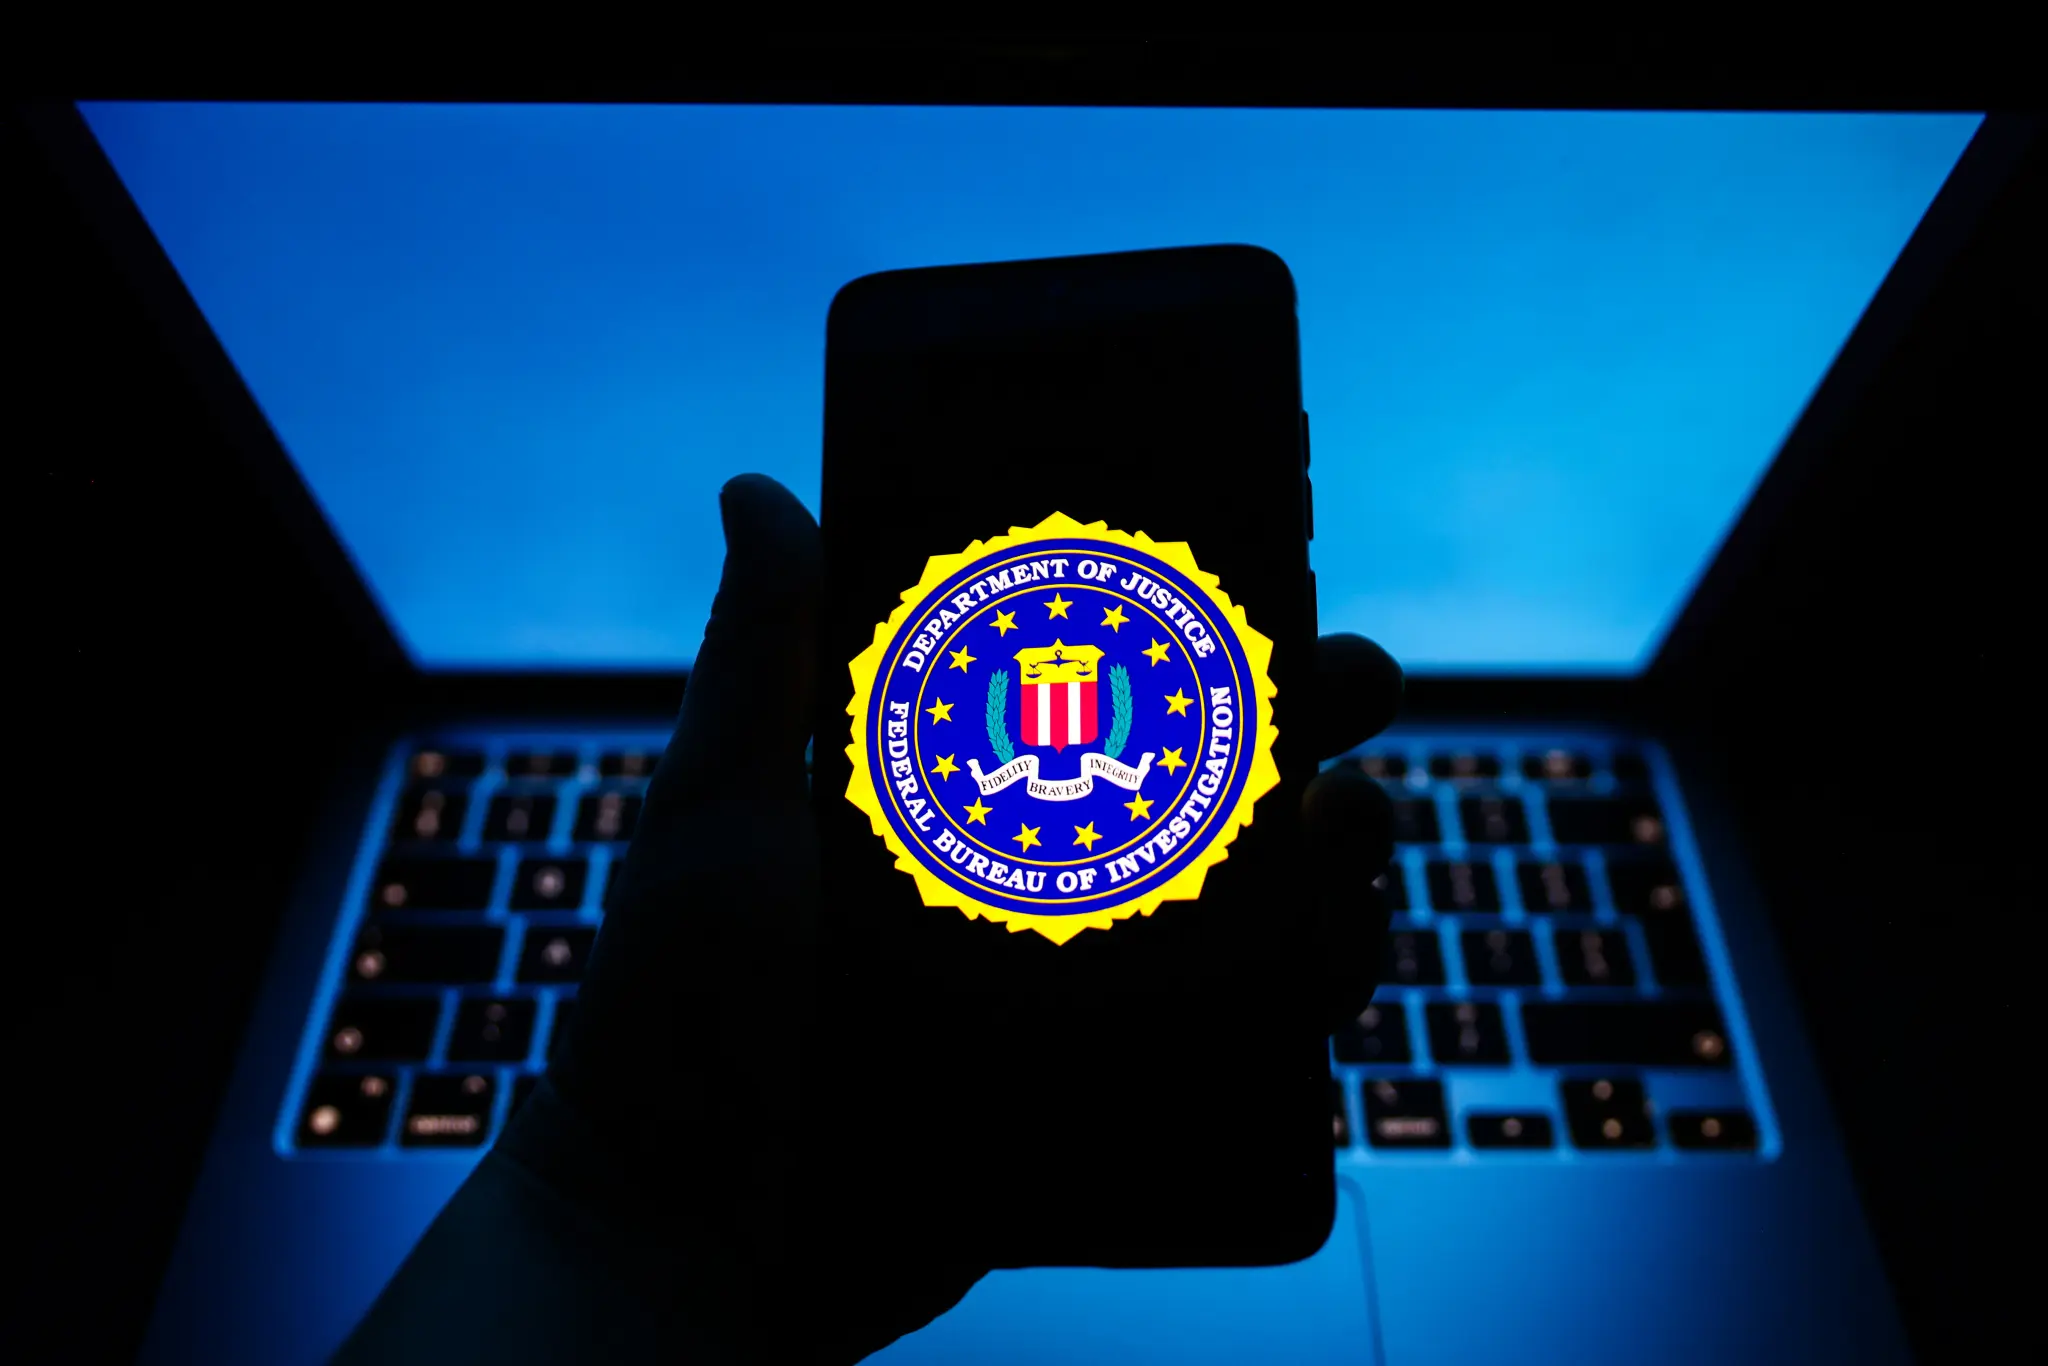 FBI Document Chill Free Speech and Associate basic terms like ‘Red Pill with ‘extremism